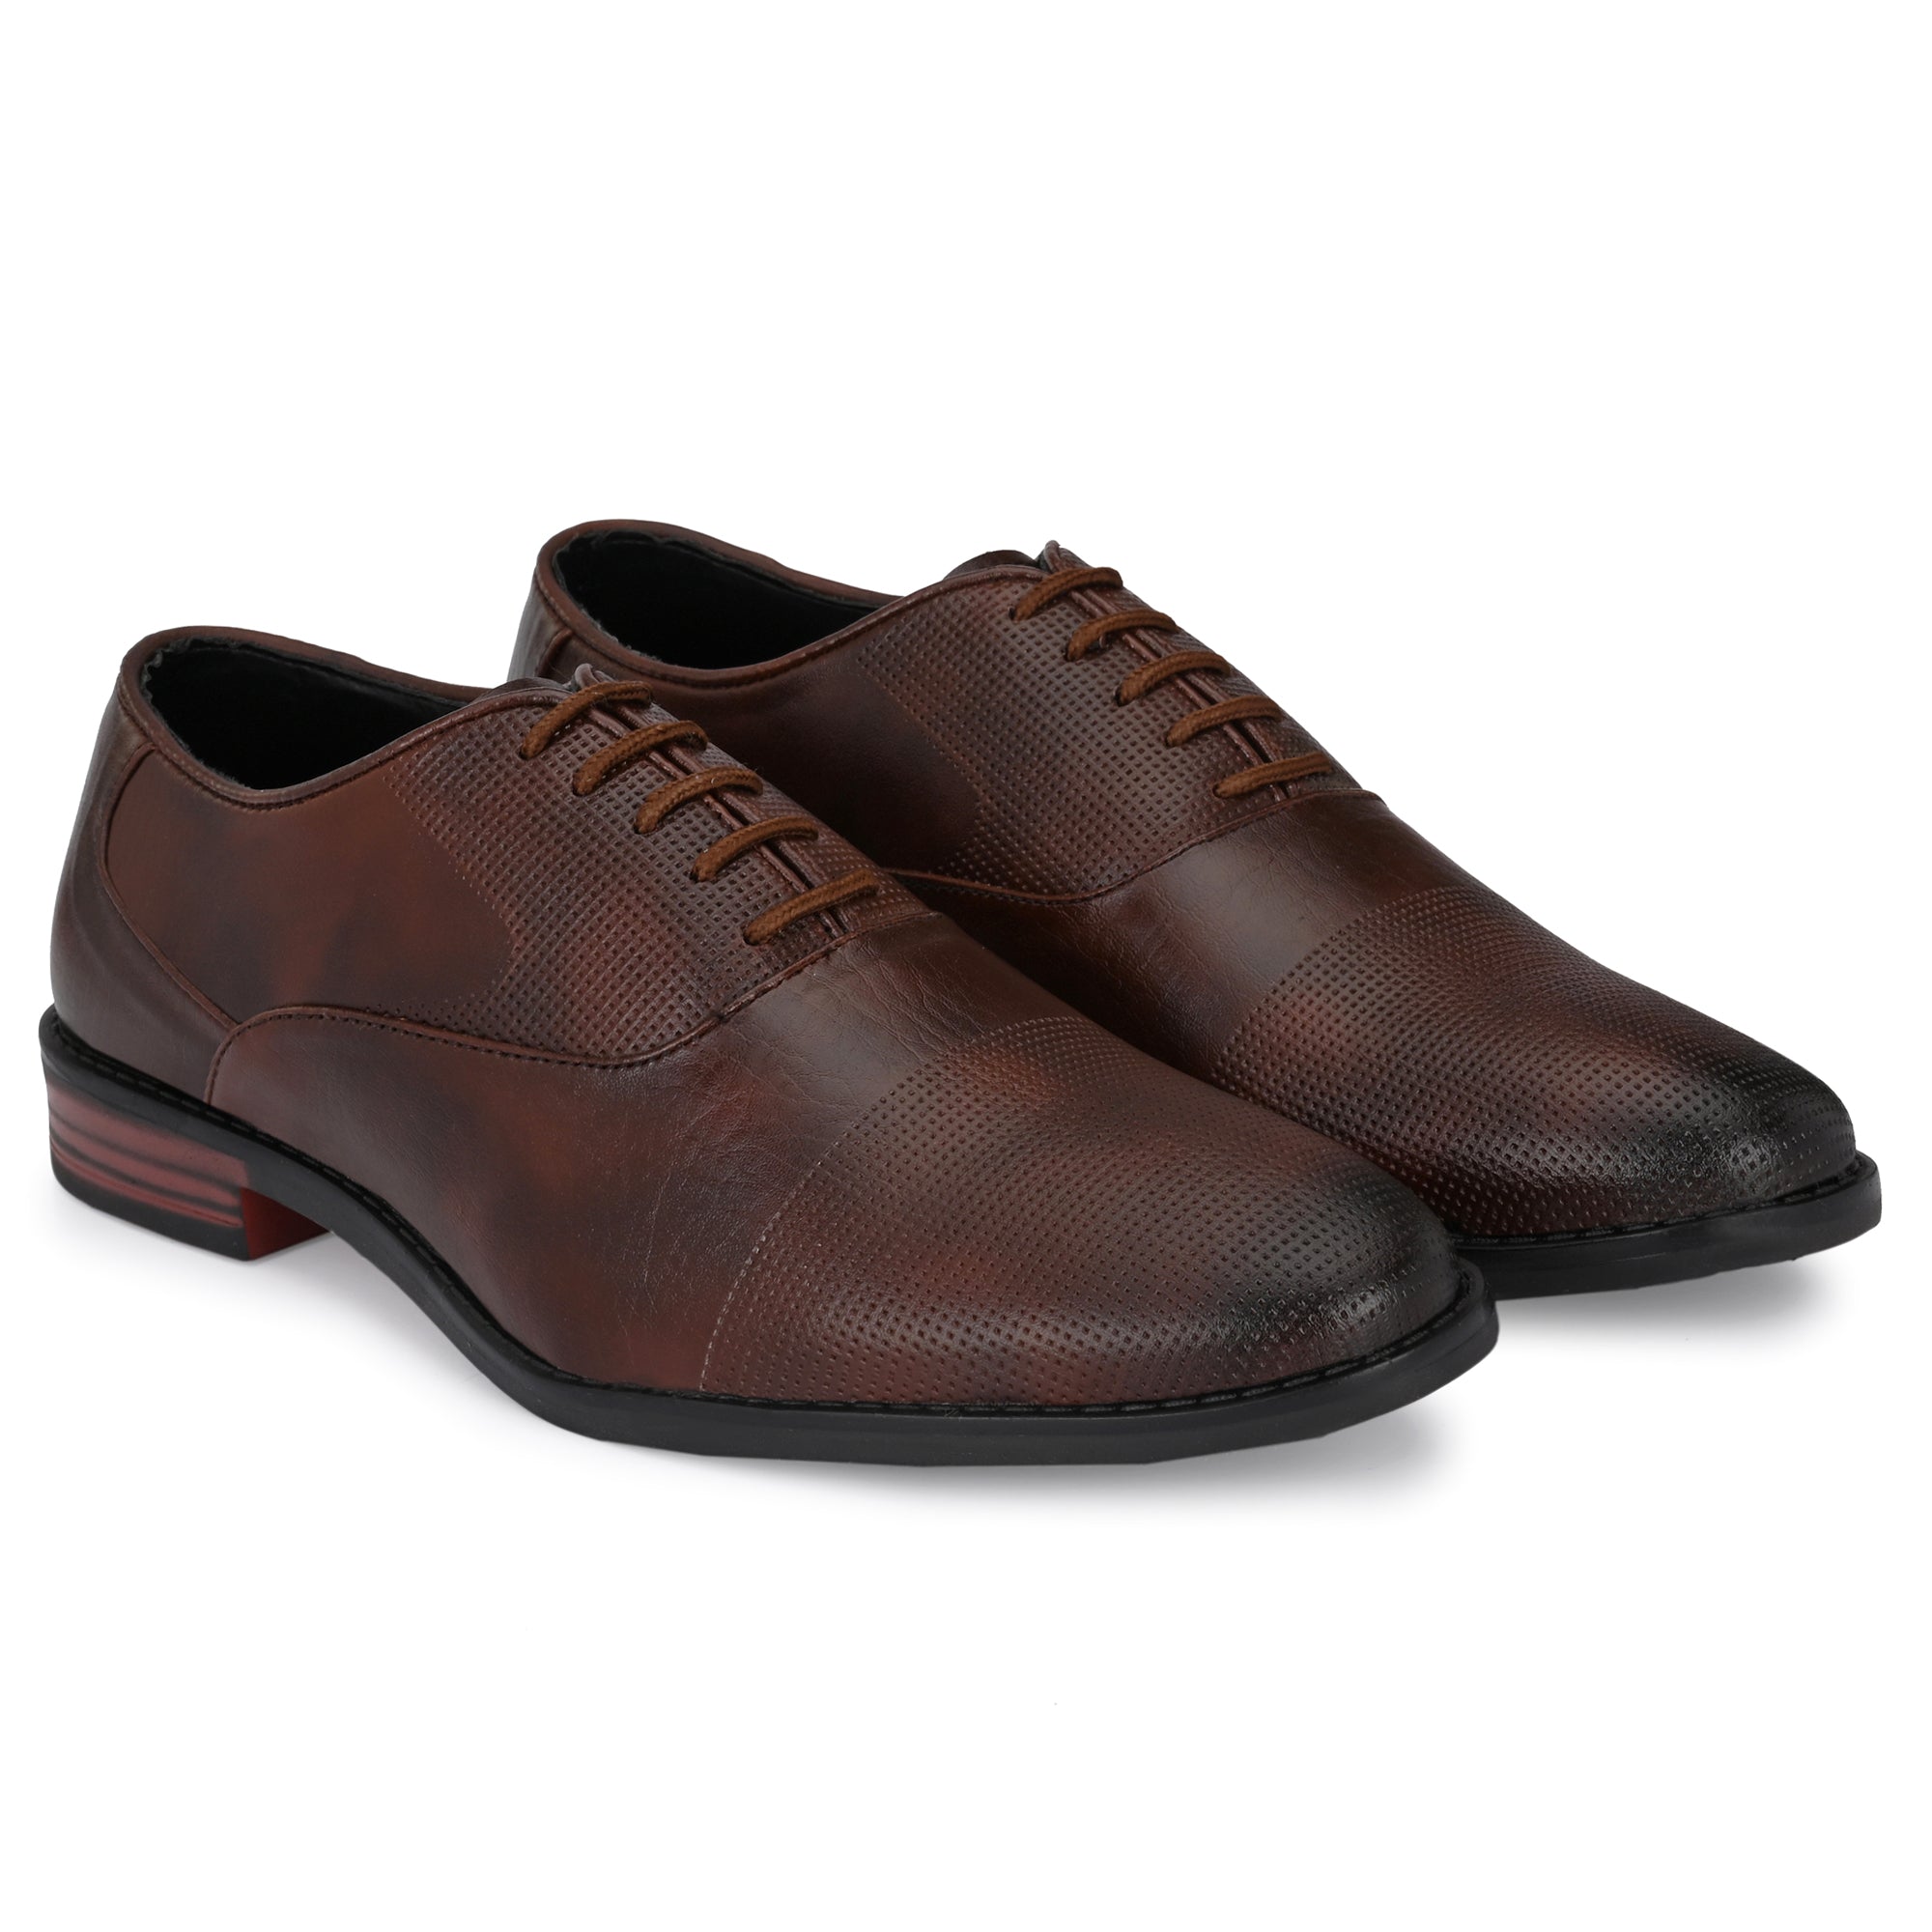 Attitudist Handcrafted Plain Oxford Matte Brown Formal Derby Shoes With Textured Toe For Men MTOBSF